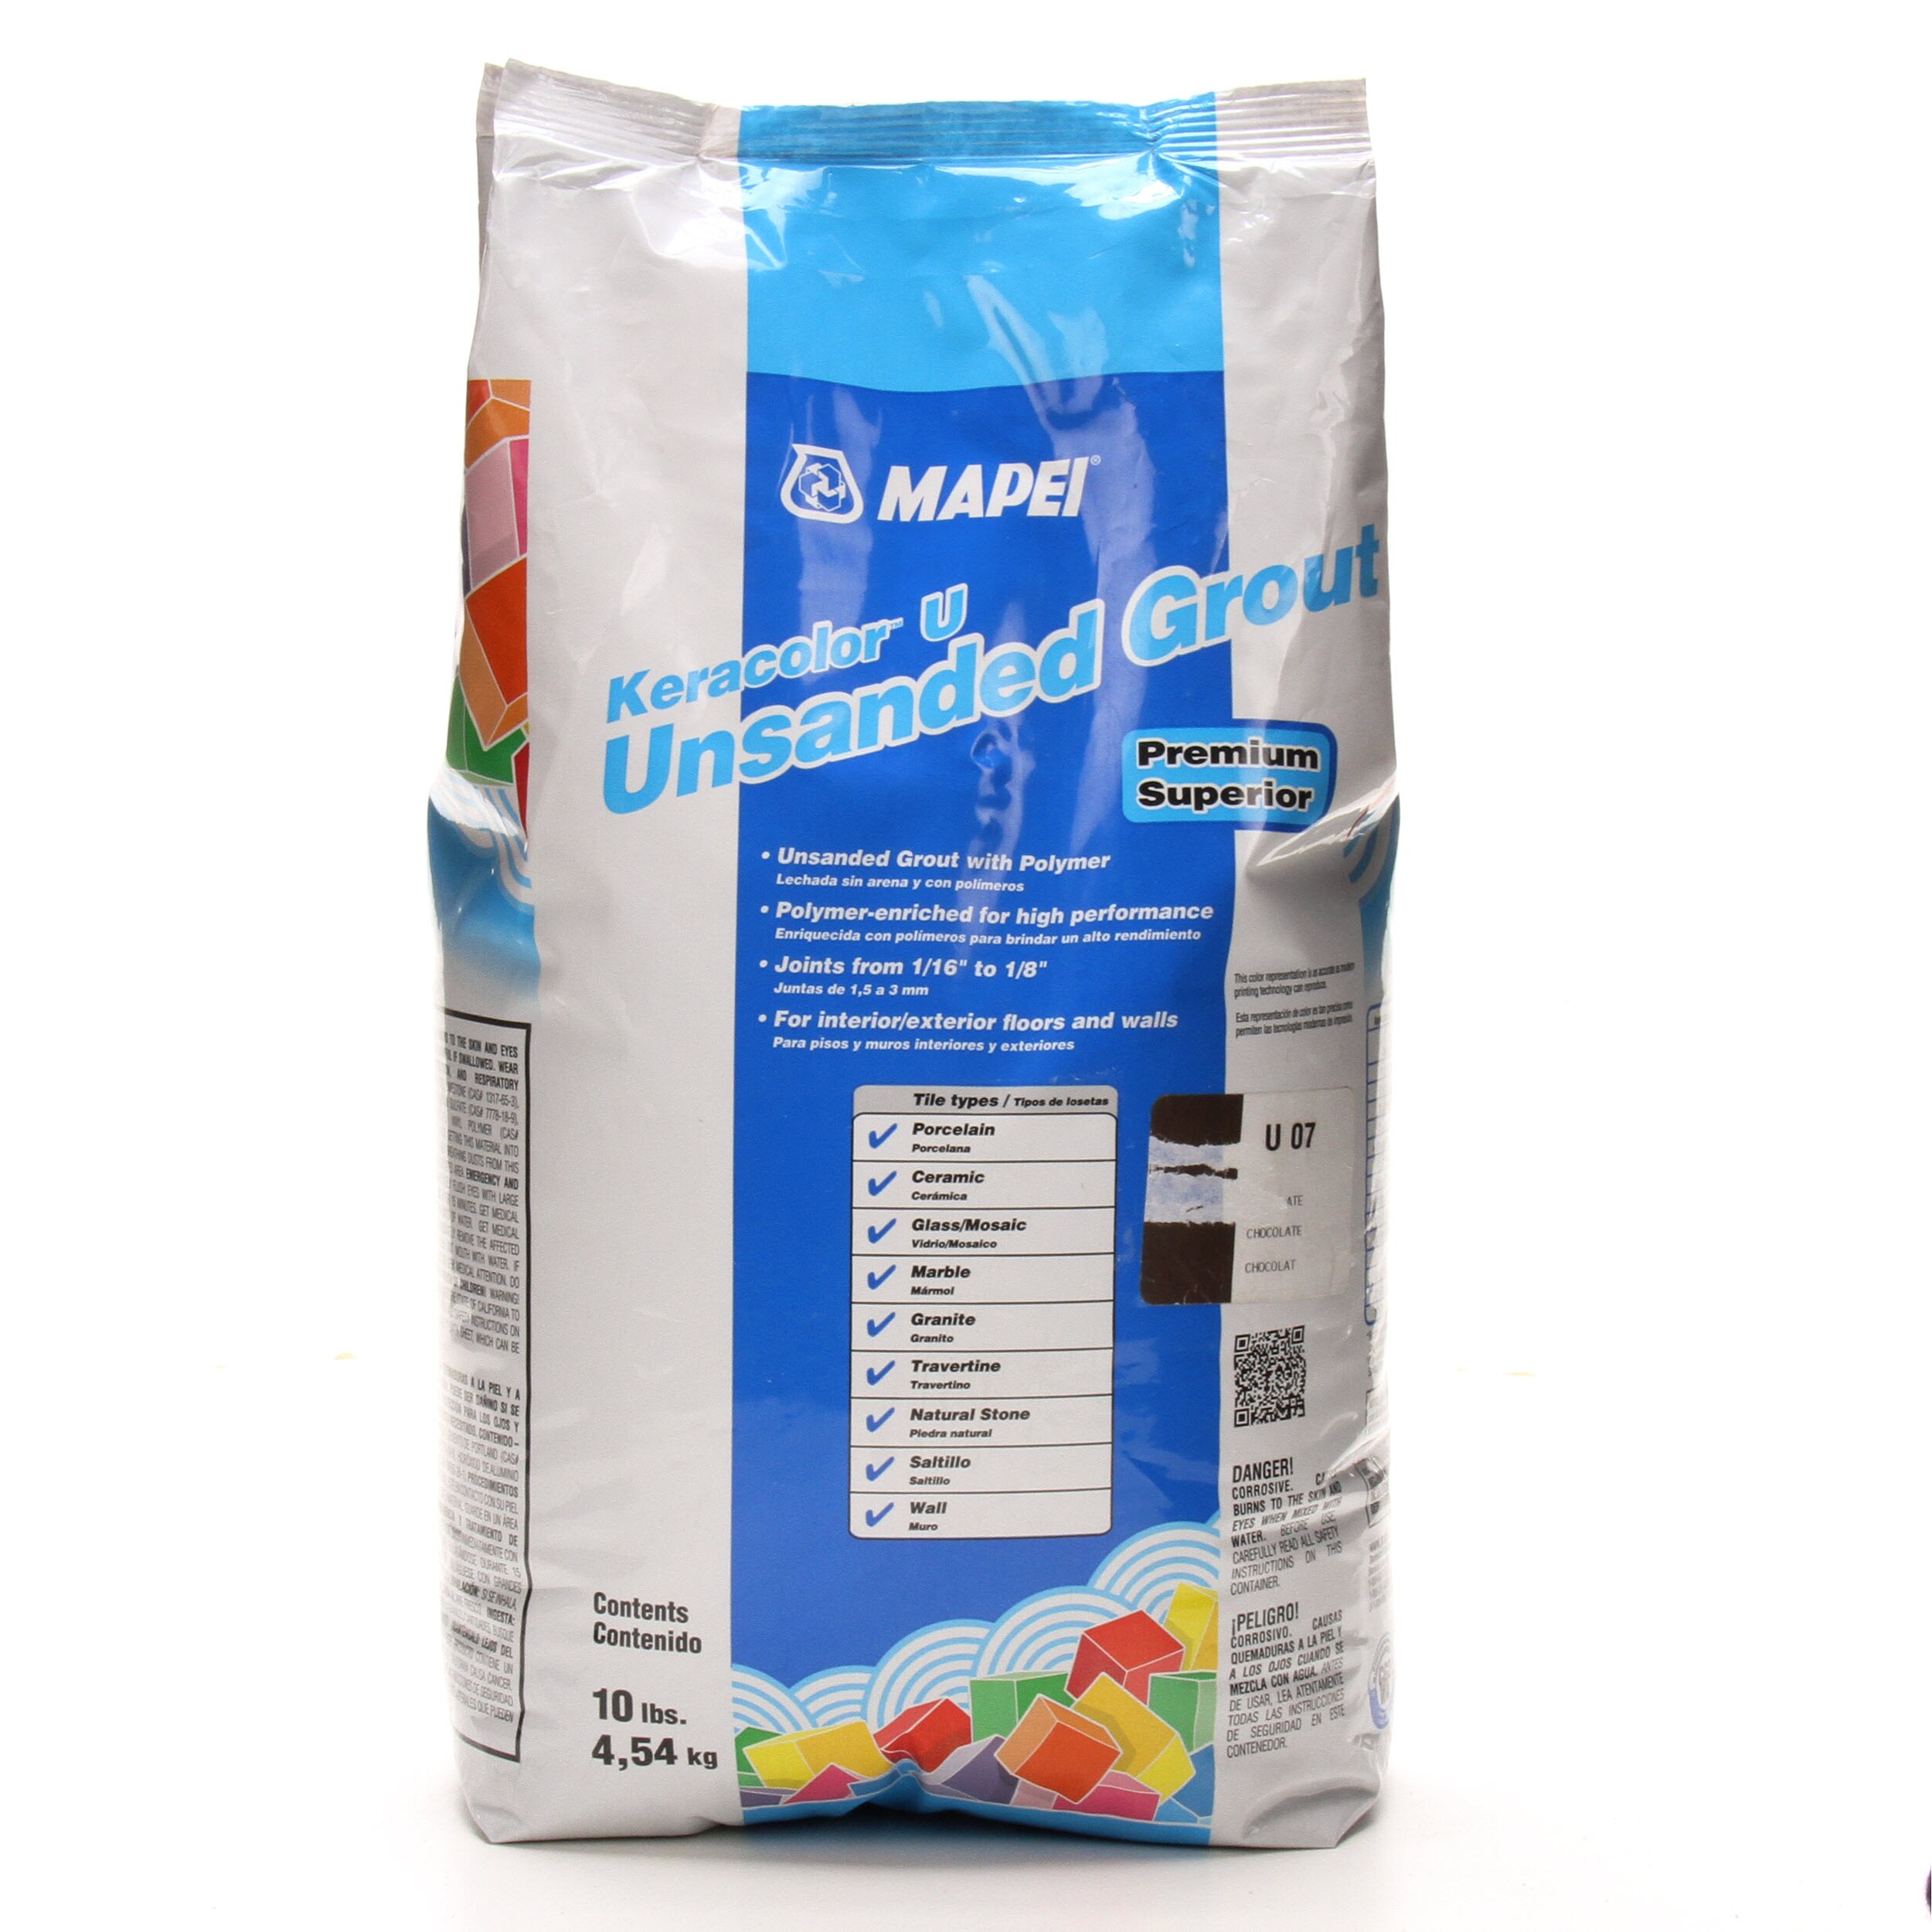 Lot Of 2 Mapei 10-lb Premium Keracolor U 07 Unsanded Grout Chocolate New 